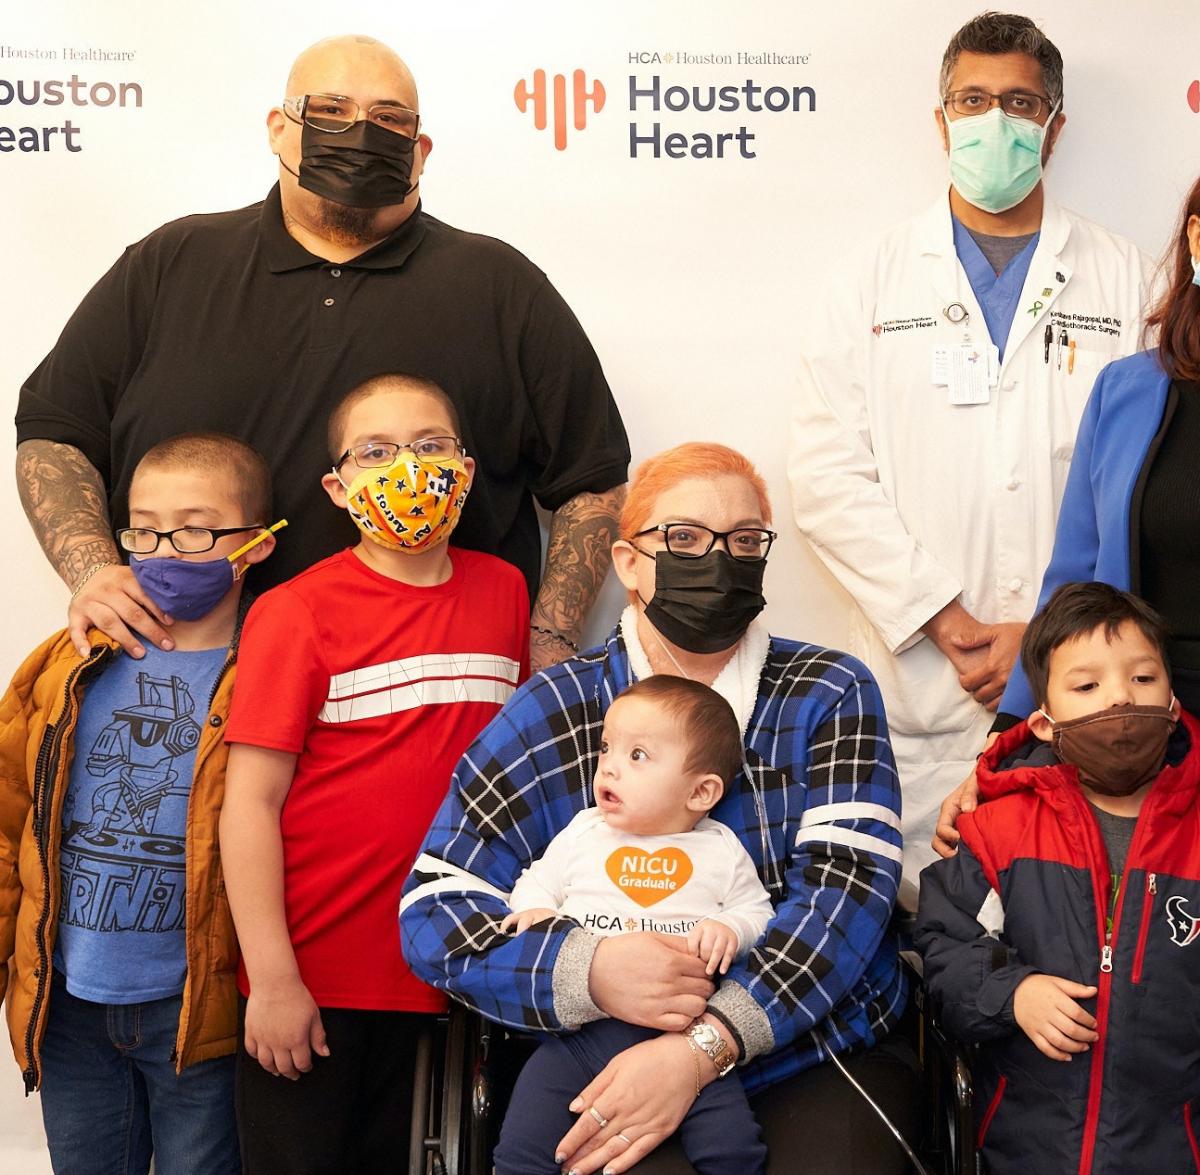 Cardiovascular surgeon Keshava Rajagopal, M.D., Ph.D., is credited with saving COVID patient Crystal Gutierrez because of implementing ECMO support to reversed her profound respiratory failure. Pictured here with her family at Houston Heart..